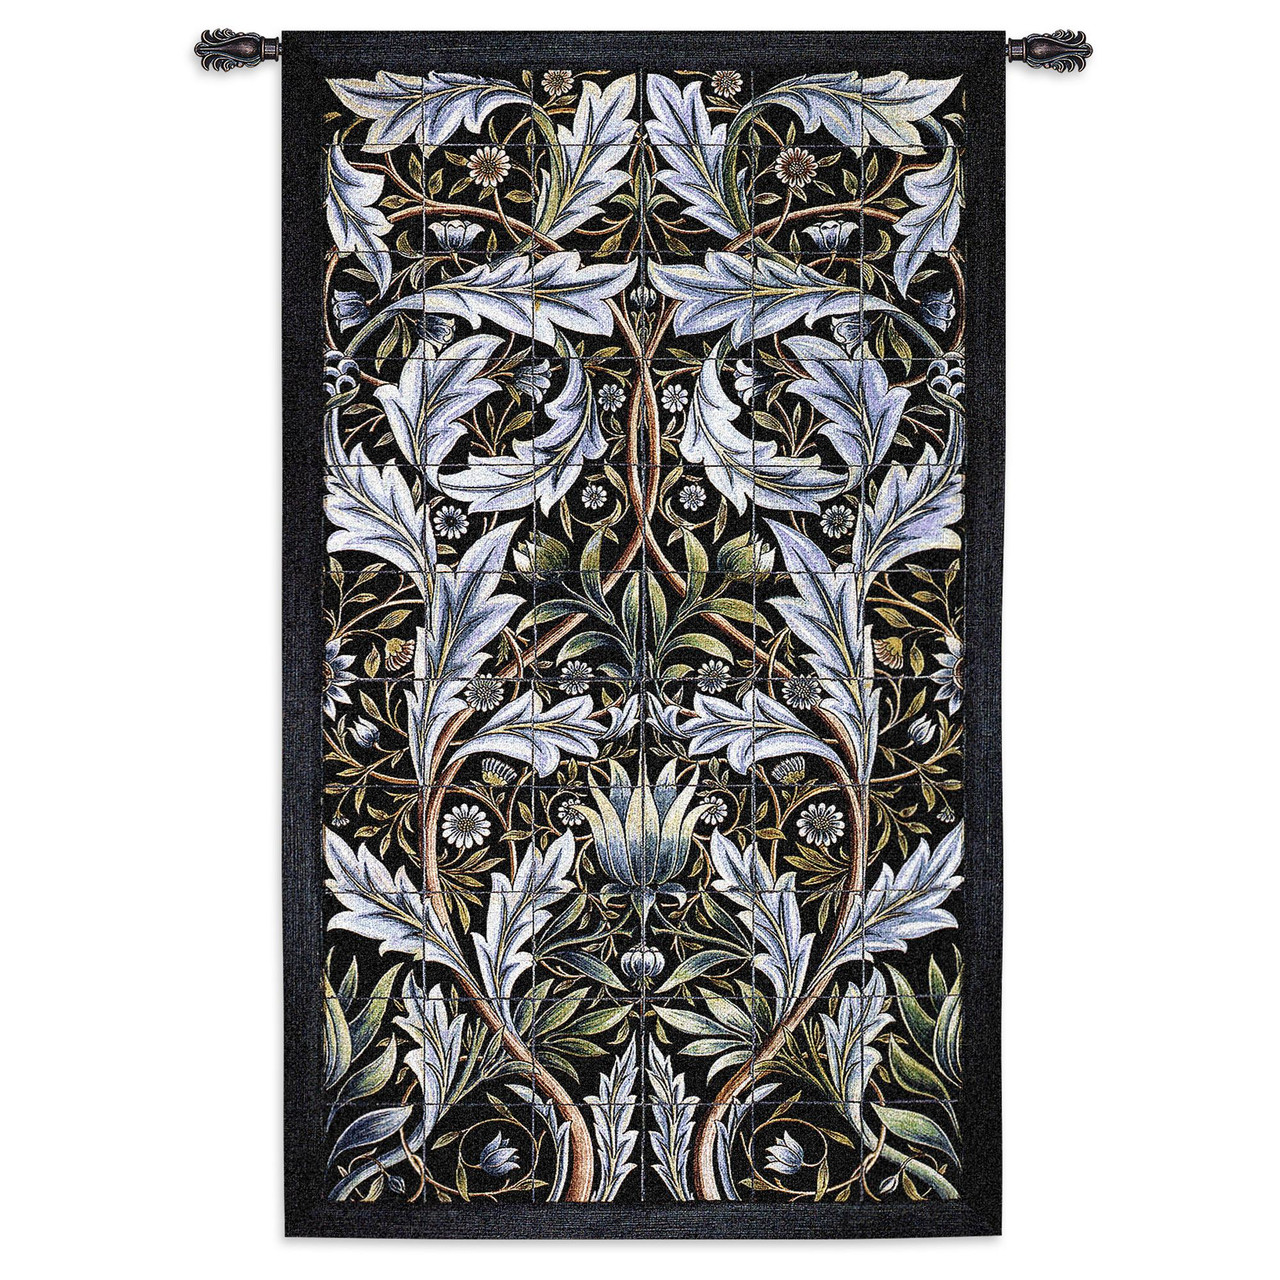 Panel of Tiles by William Morris Woven Tapestry Wall Art Hanging Powder  Blue and Dark Green Filigree Pattern 100% Cotton USA Size 82x53